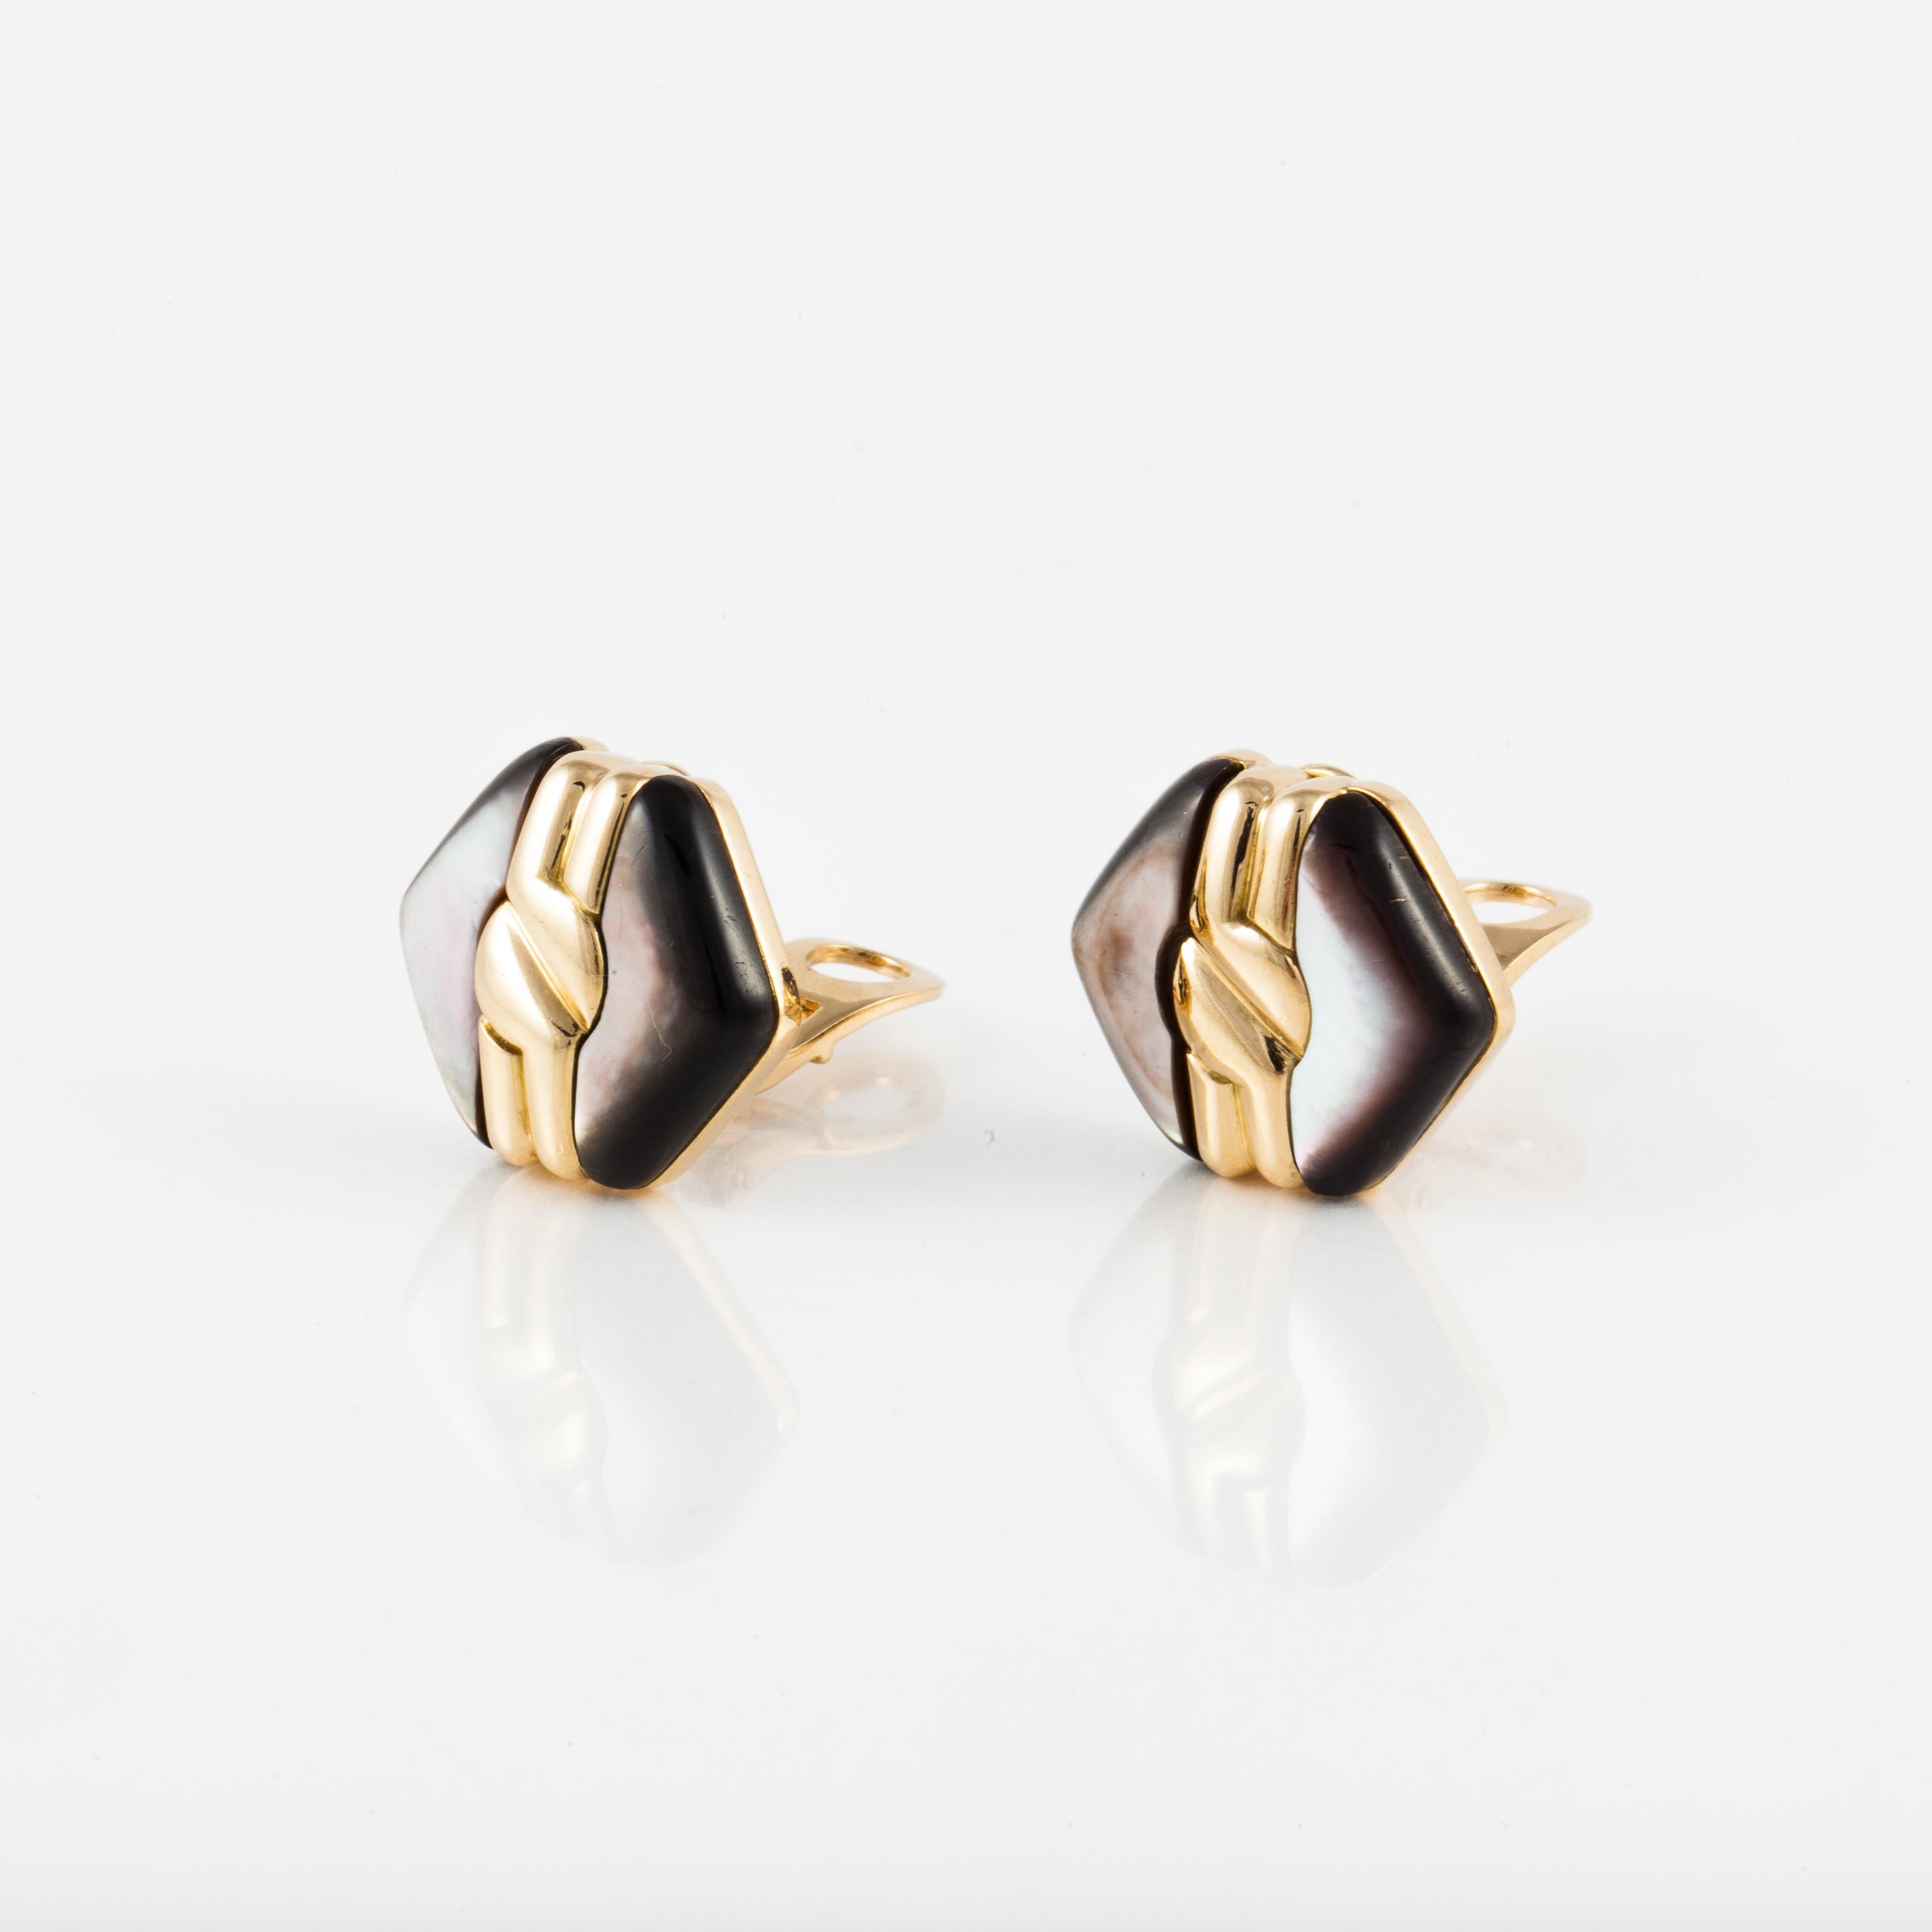 Bulgari button earrings in 18K yellow gold with gray mother-of-pearl.  Stamped:  Bulgari BD7056.  Earrings are clips and measure 13/16 inches across.